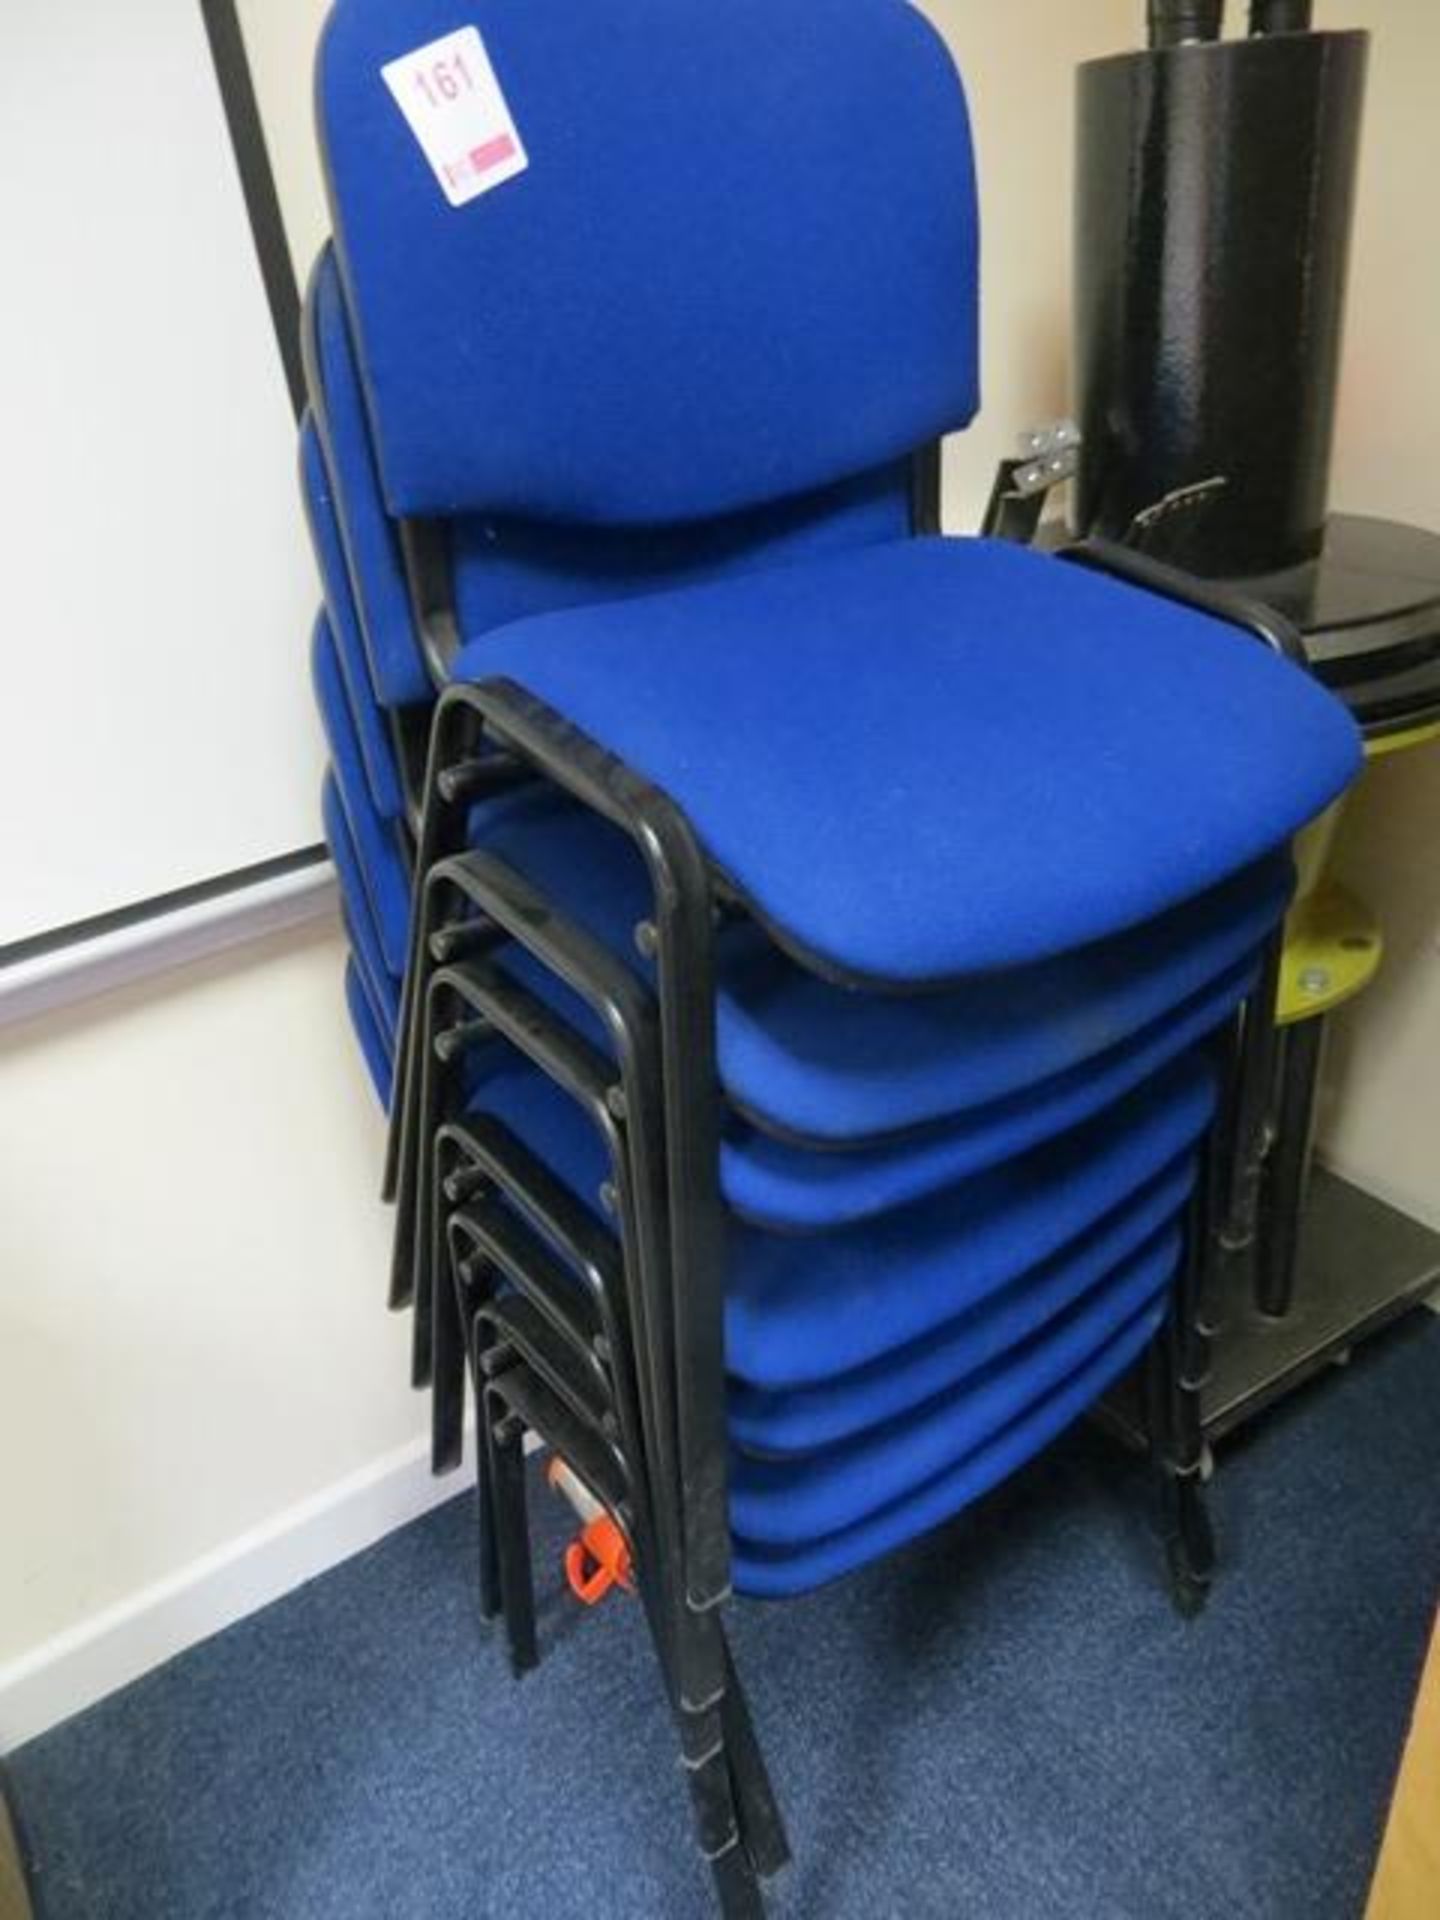 Seven Steel Frame Chairs Blue Cloth* This lot is located at Unit 15, Horizon Business Centre,